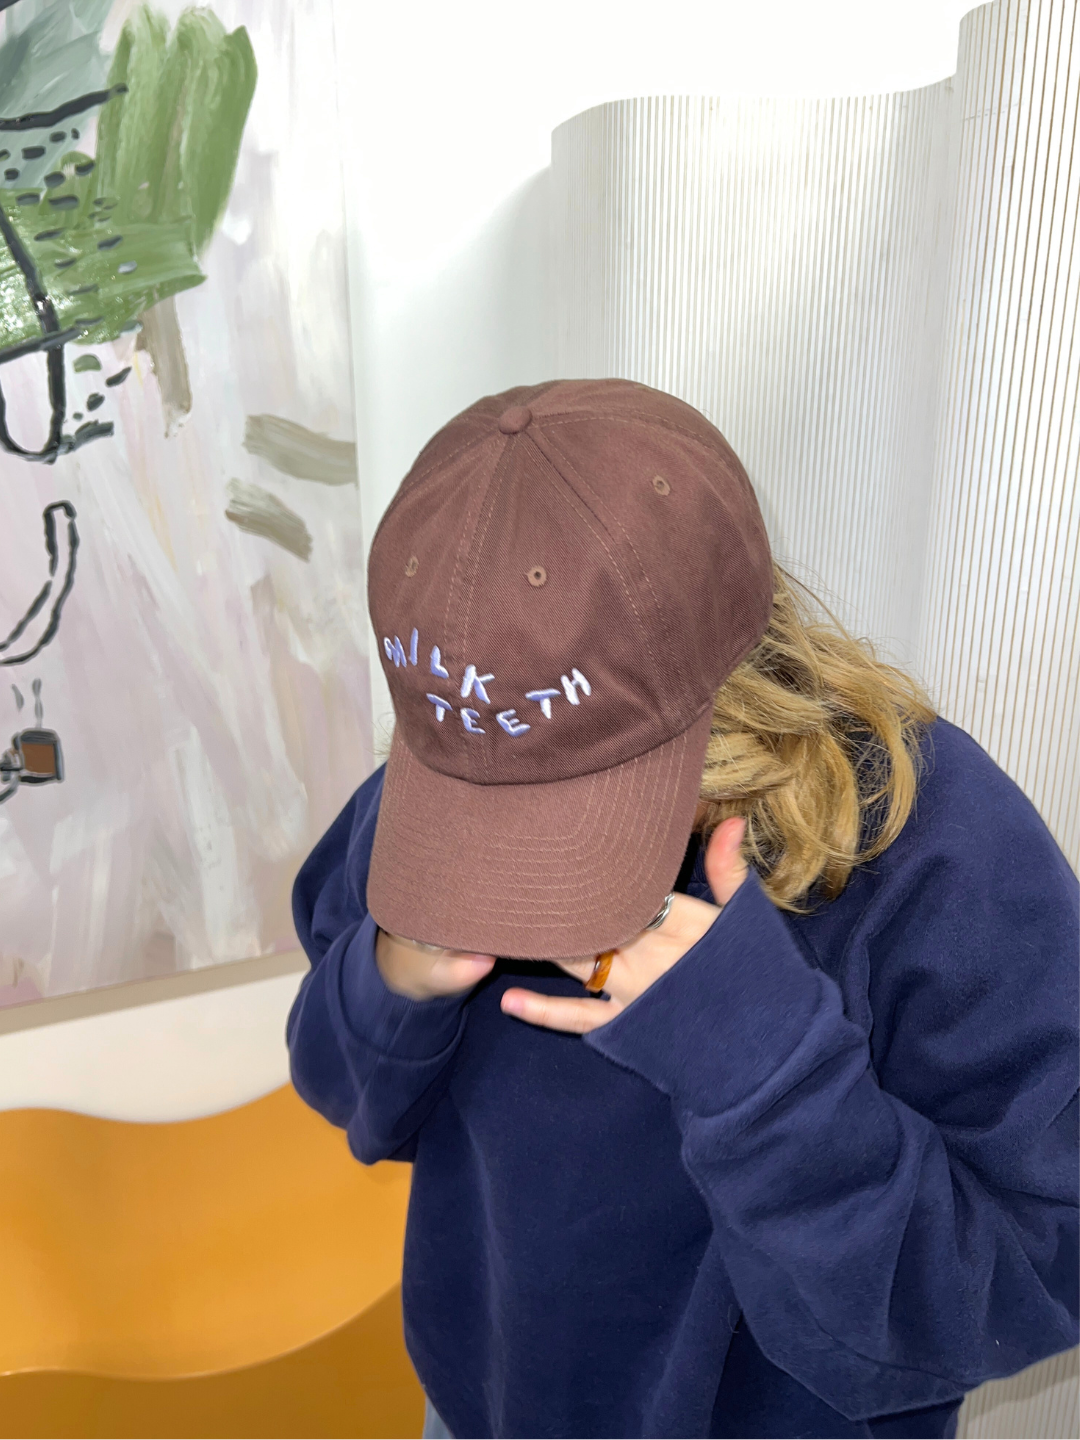 An adult wearing the Milk teeth adult baseball cap in brown with lavender logo embroidery. They wear a navy sweatshirt in a white room. Behind them is an orange bench and an abstract painting.